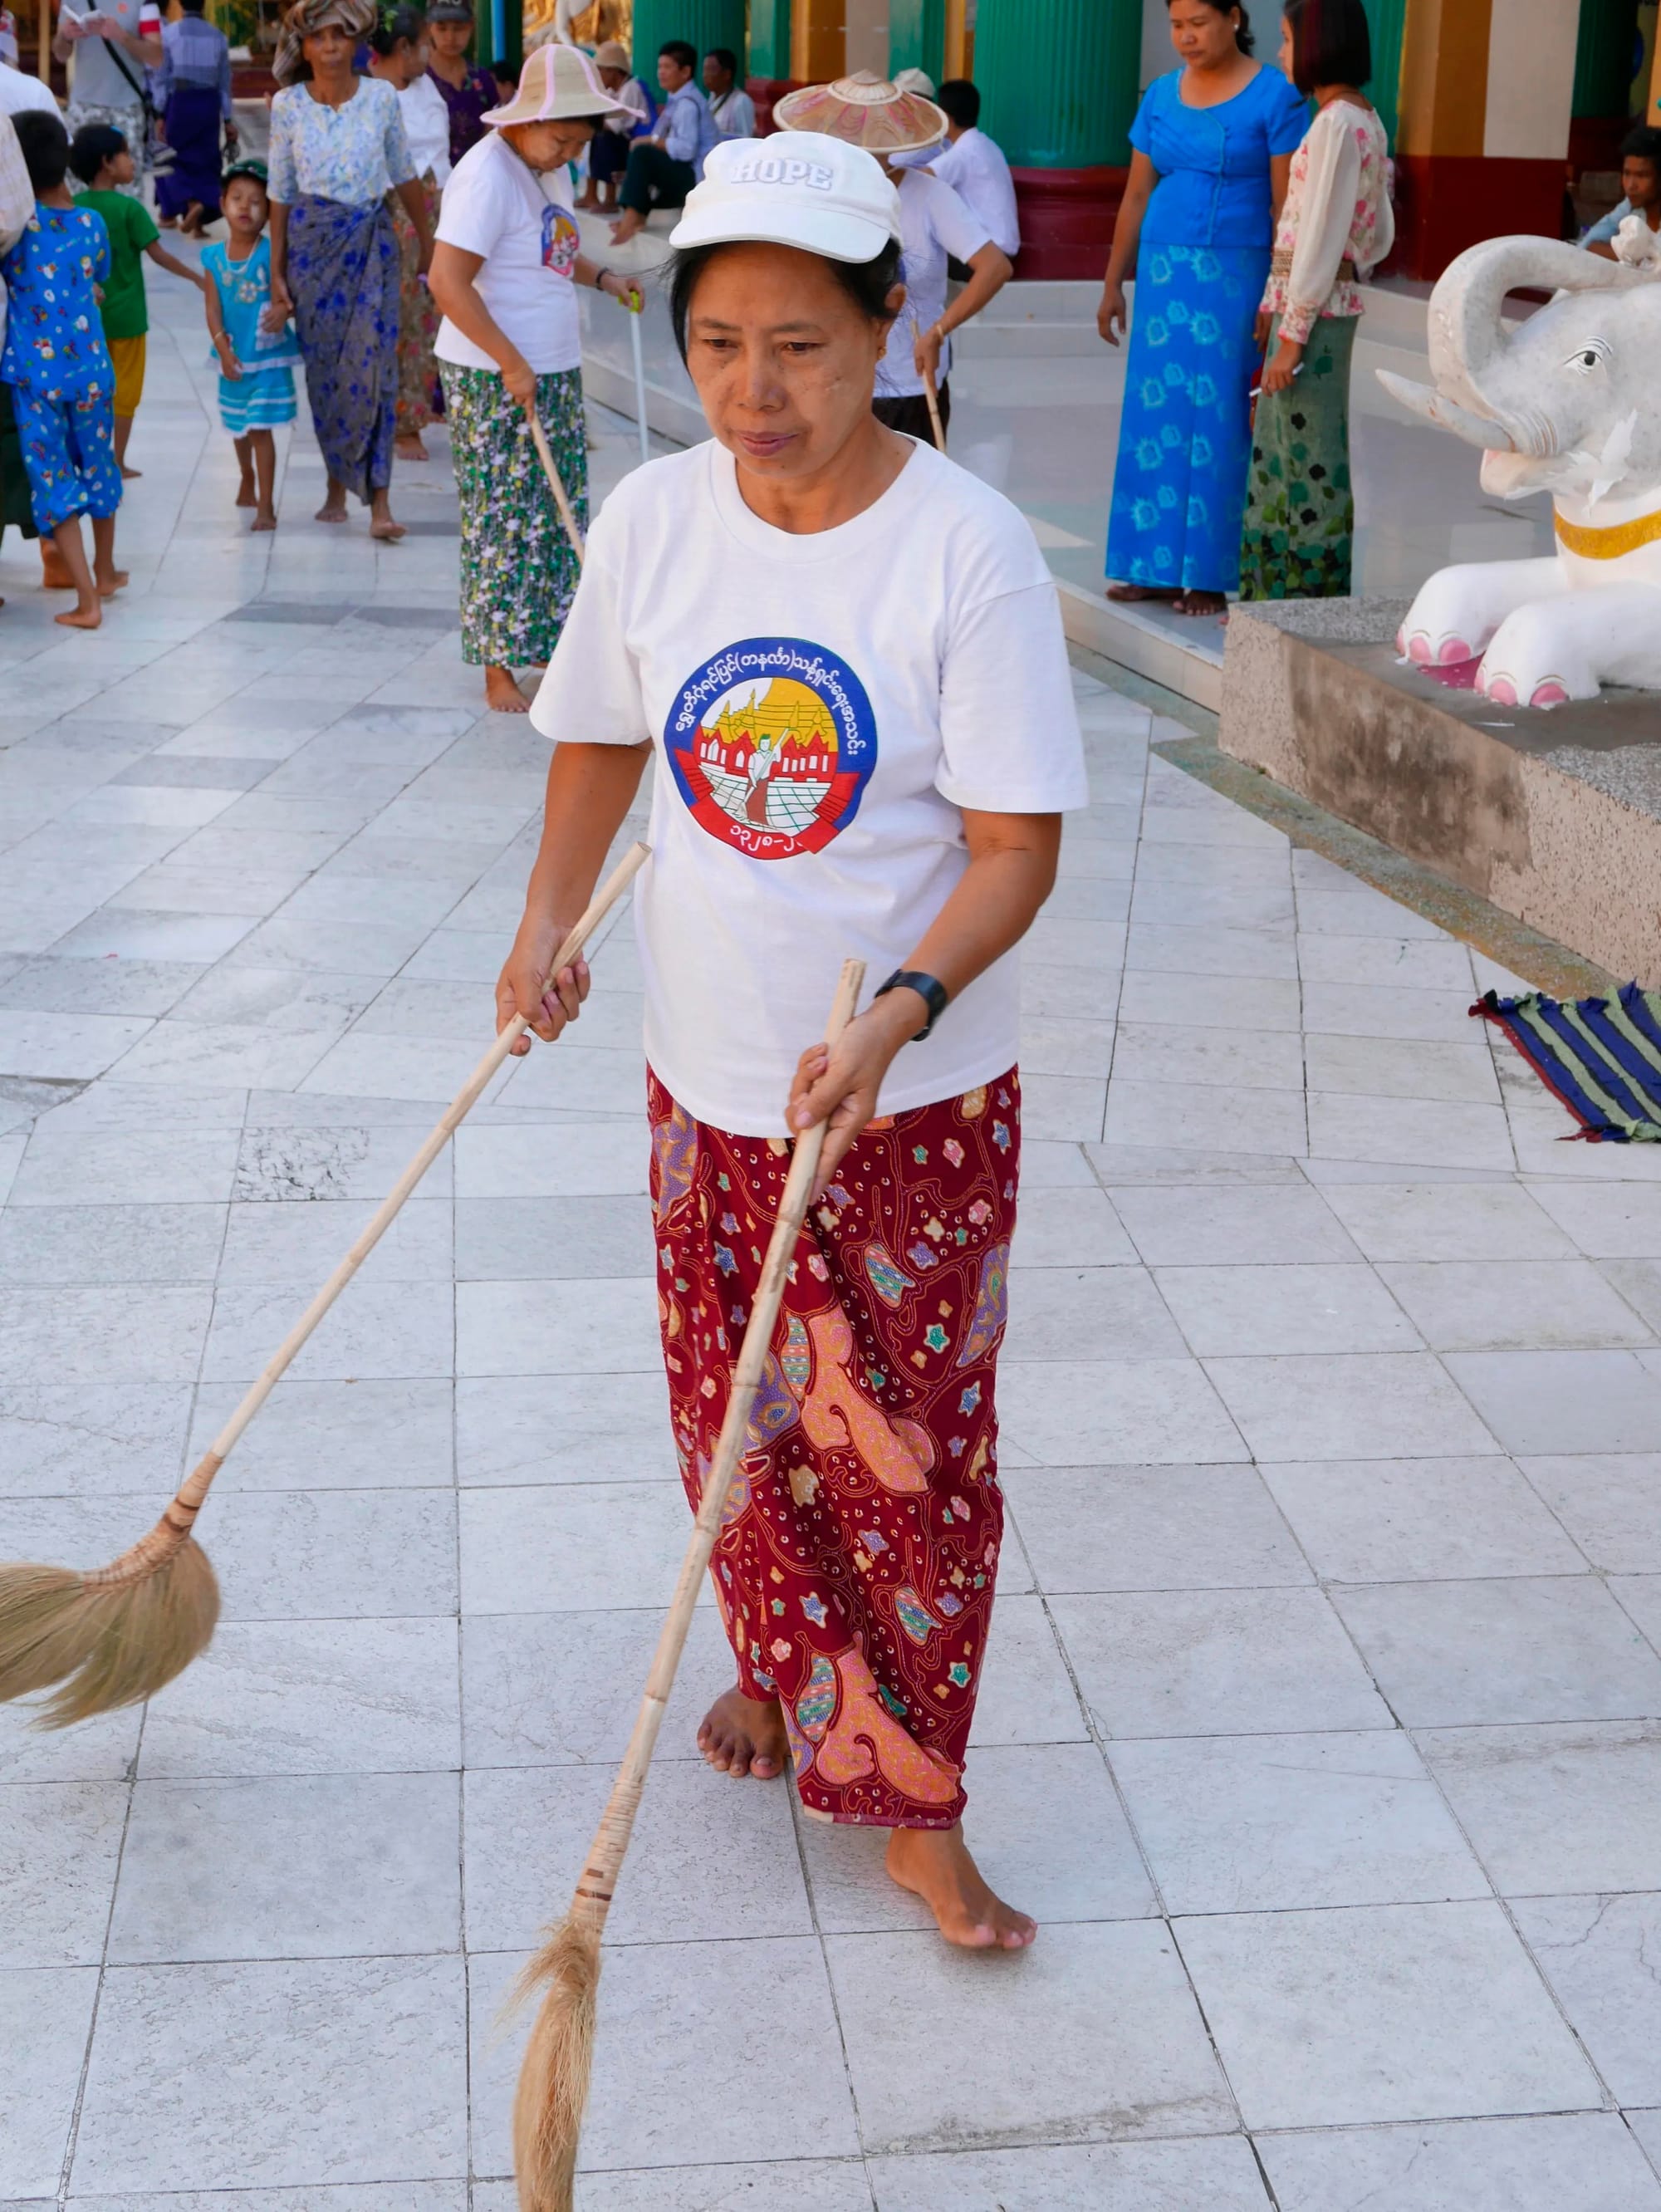 Photo by Author — a cleaner at the Shwedagon Pagoda